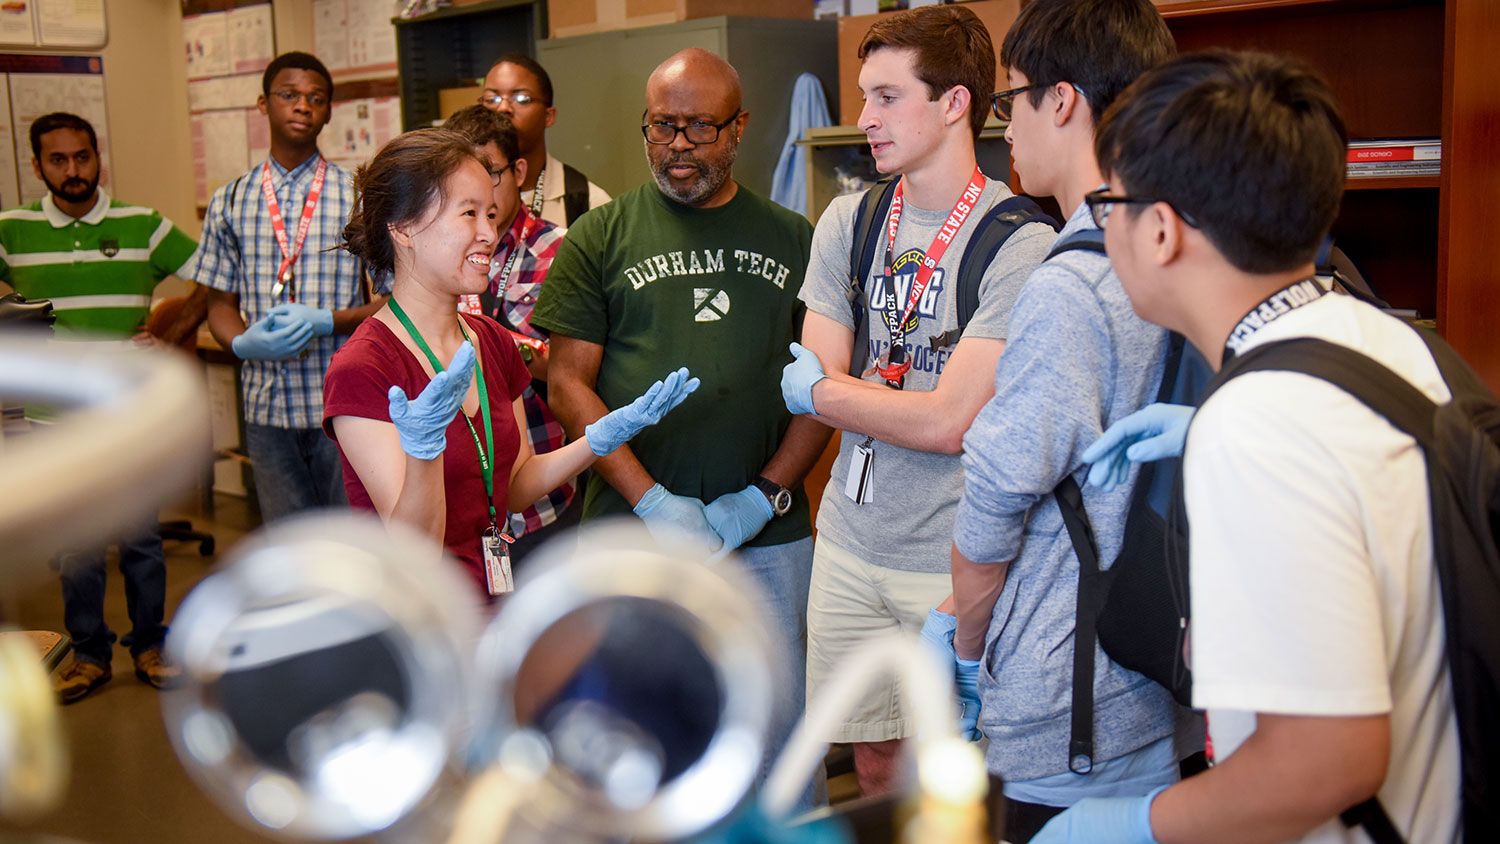 High school students with visual impairments or blindness attended a 2016 summer camp at NC State's Engineering Place. Their activities included lab tours with participants from the College of Engineering's Research Experiences for Teachers Program.